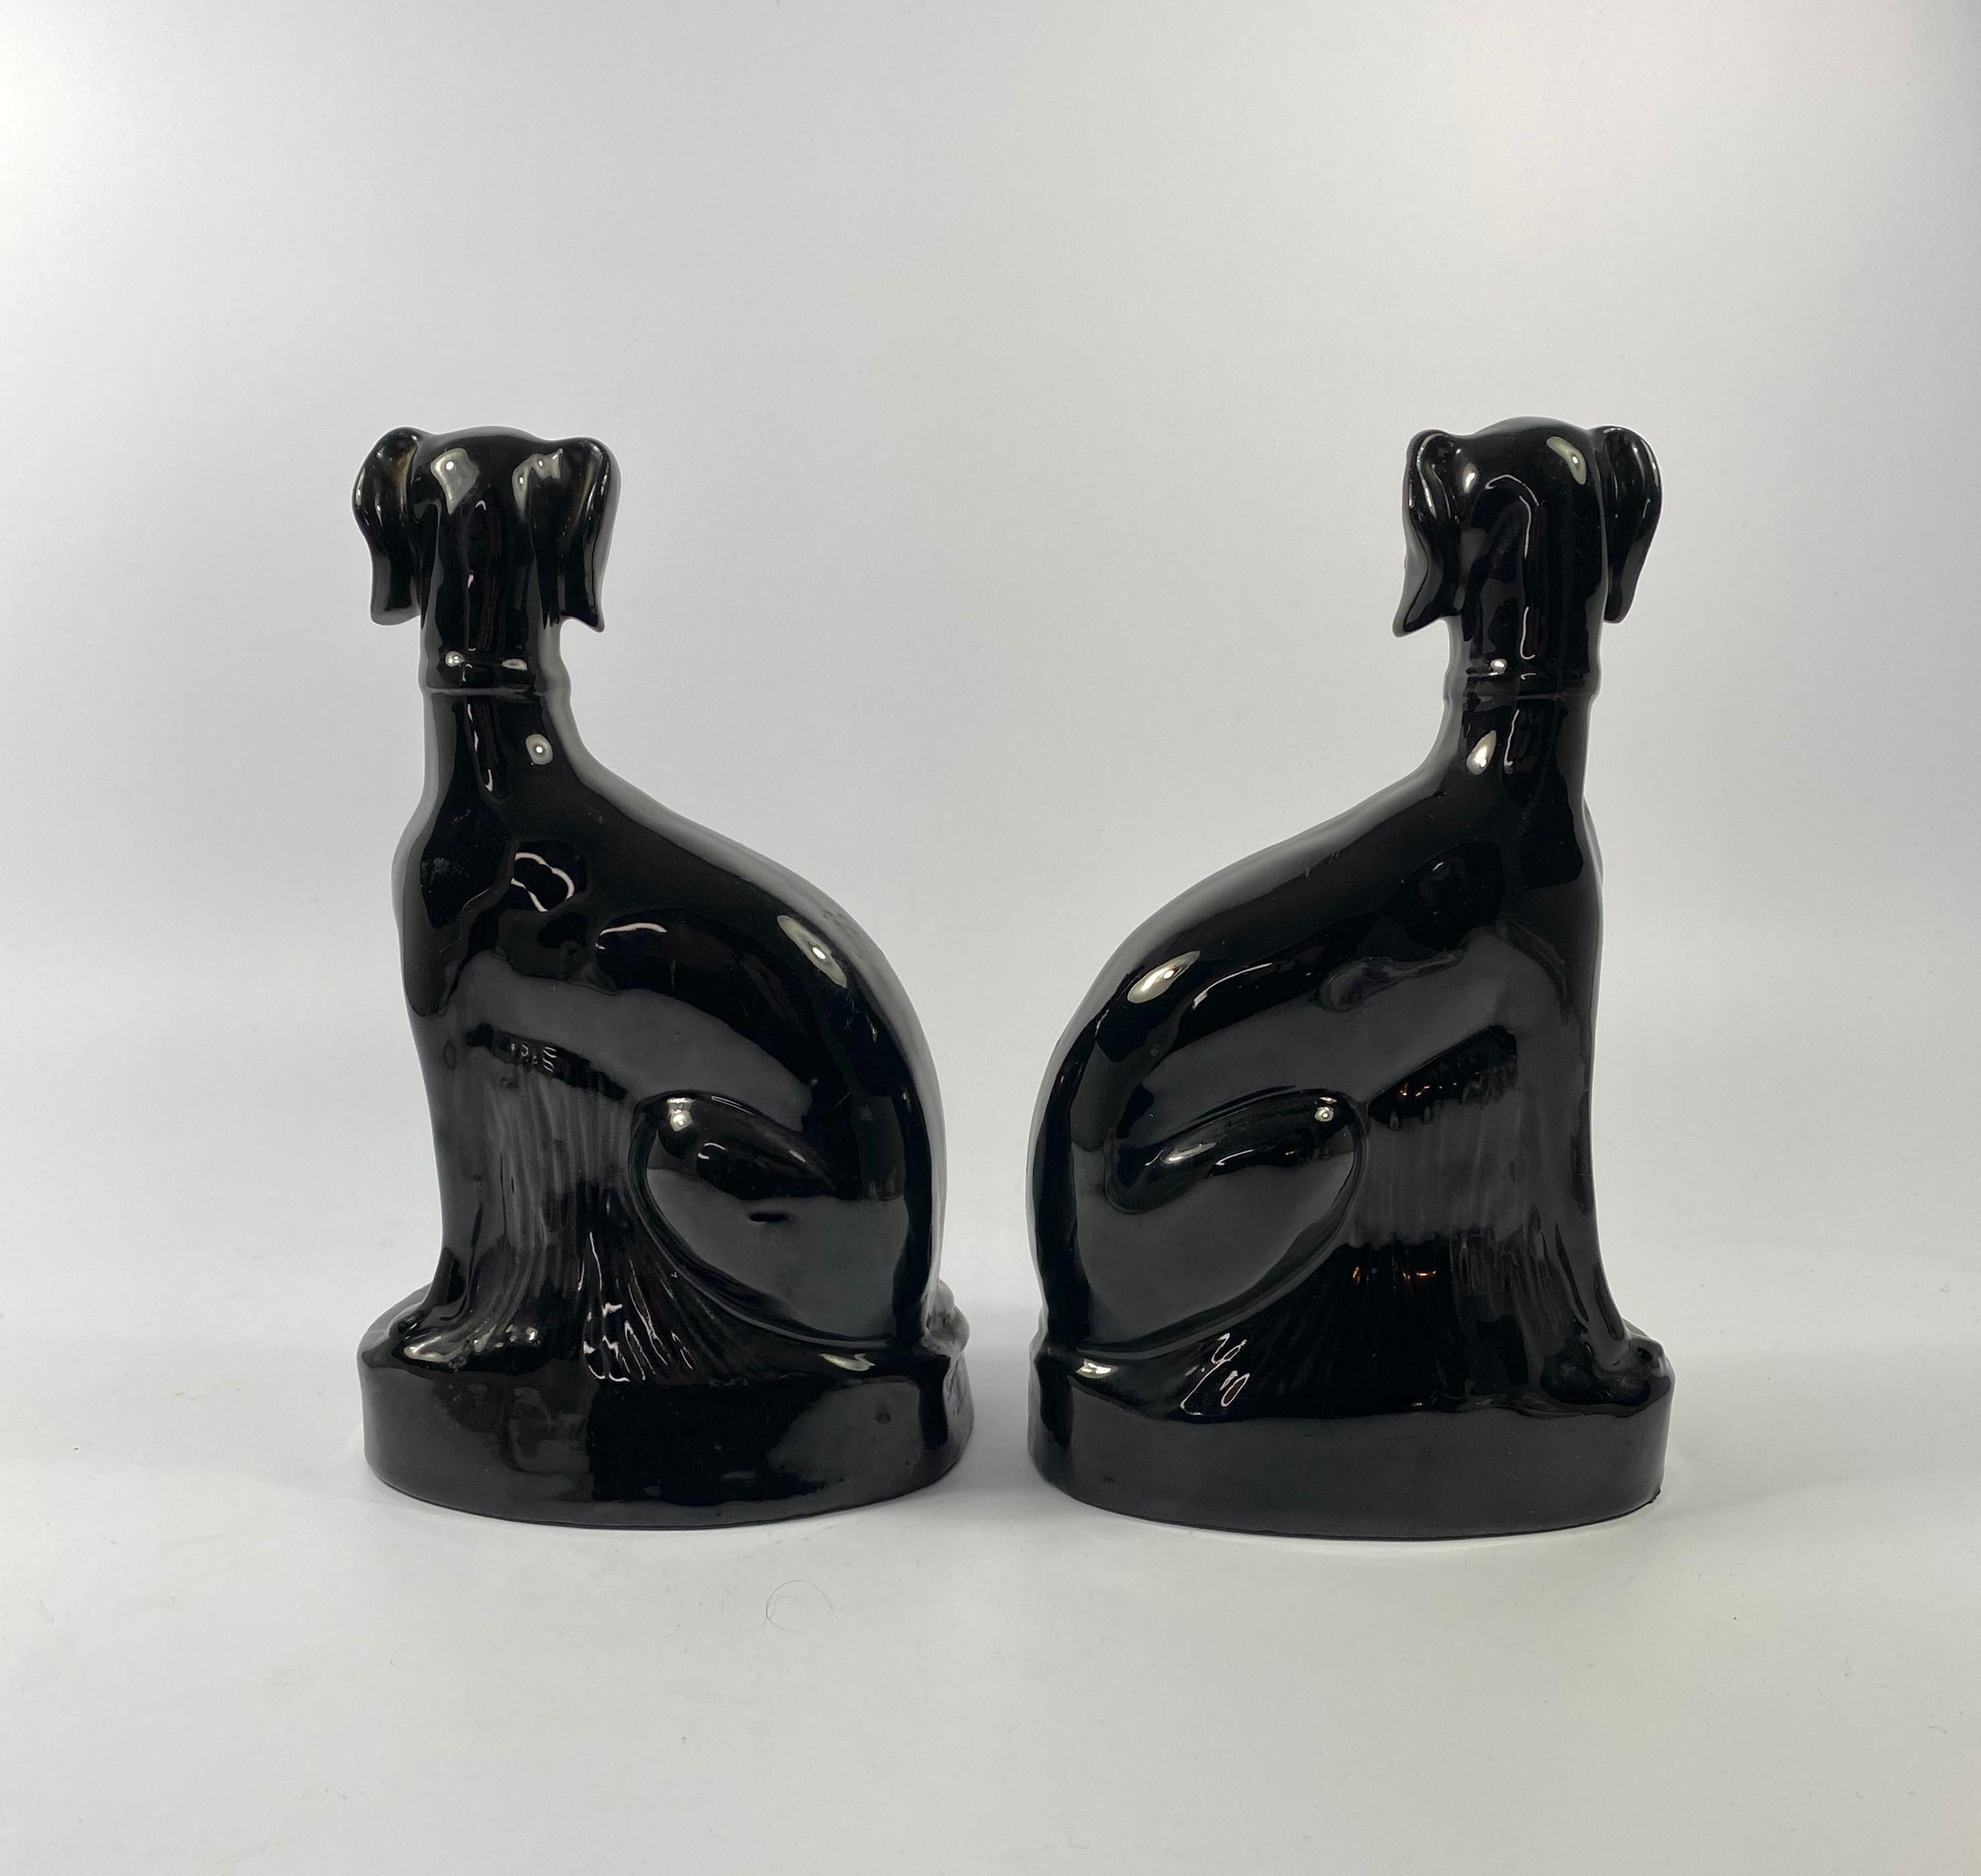 Rare pair of Staffordshire ‘Jackfield’ pottery Lurchers, c. 1860. The finely modelled dogs, having separate front legs, and covered in a black glaze. Painted with blue eyes, and edged in gilt.

See – ‘A-Z of Staffordshire Dogs’, Clive Mason Pope,